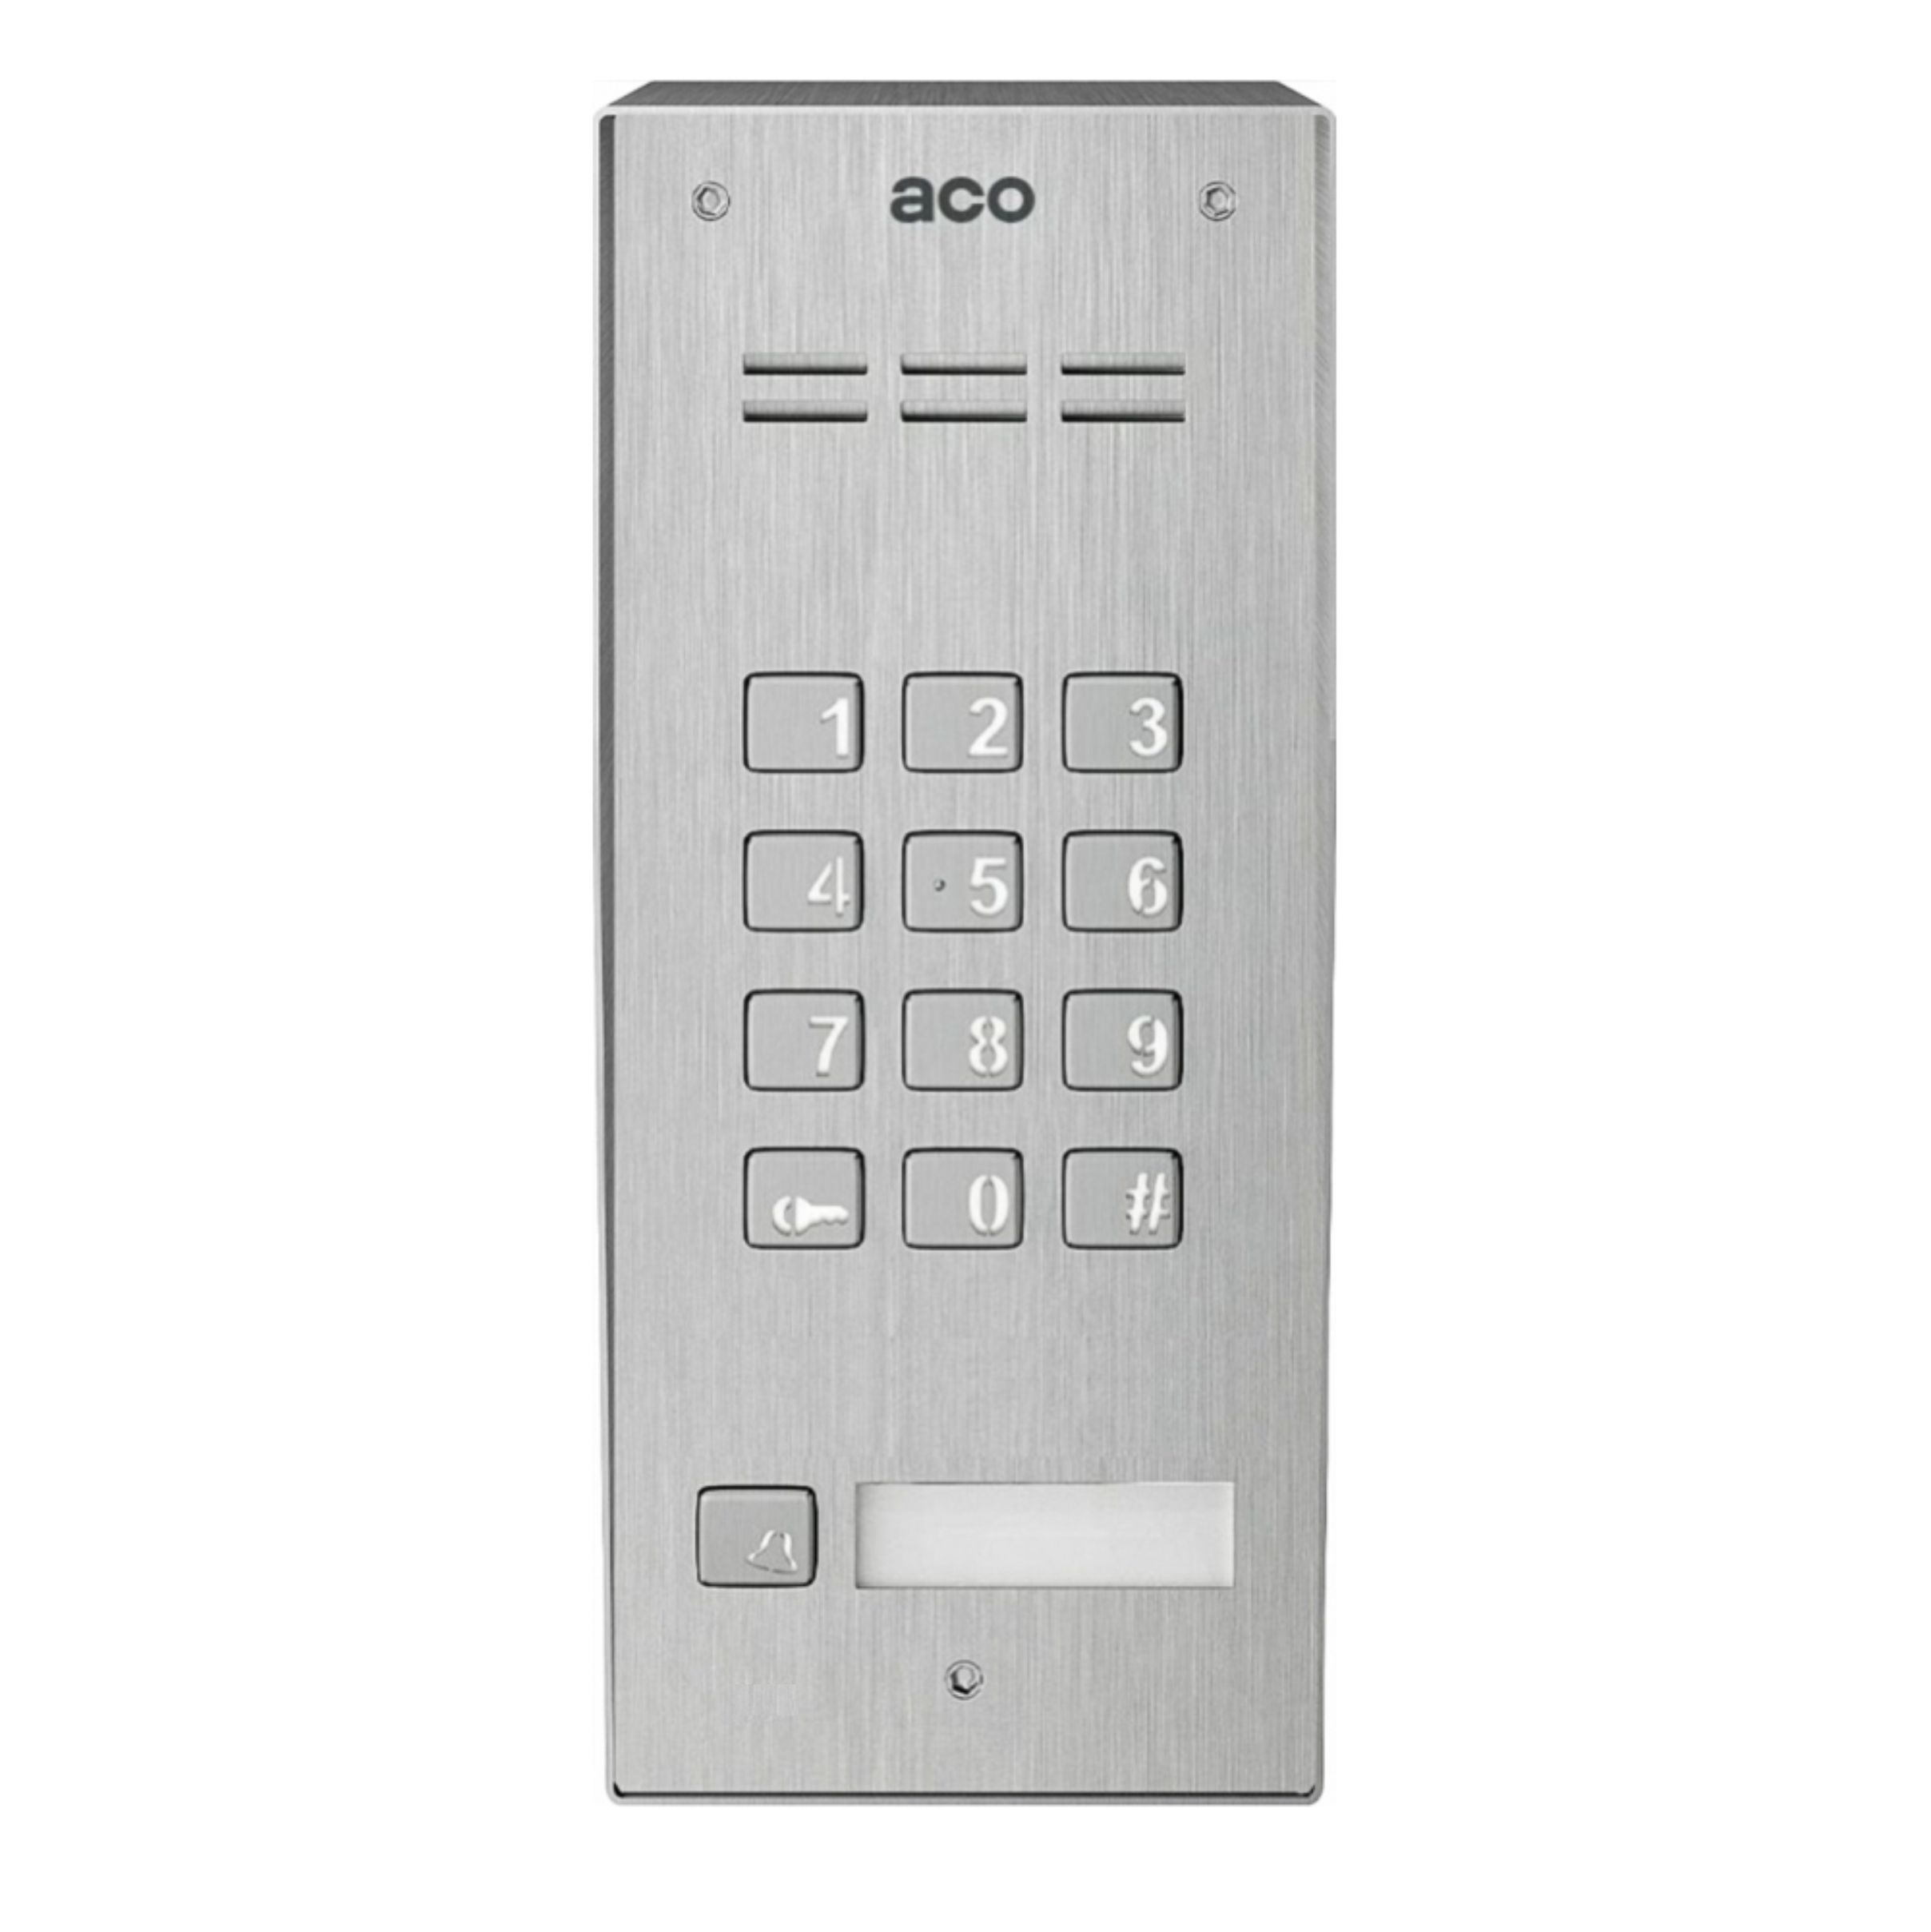 FAM-P-1NPZSACC NT Digital door entry panel with key fob reader, code lock and 1 button